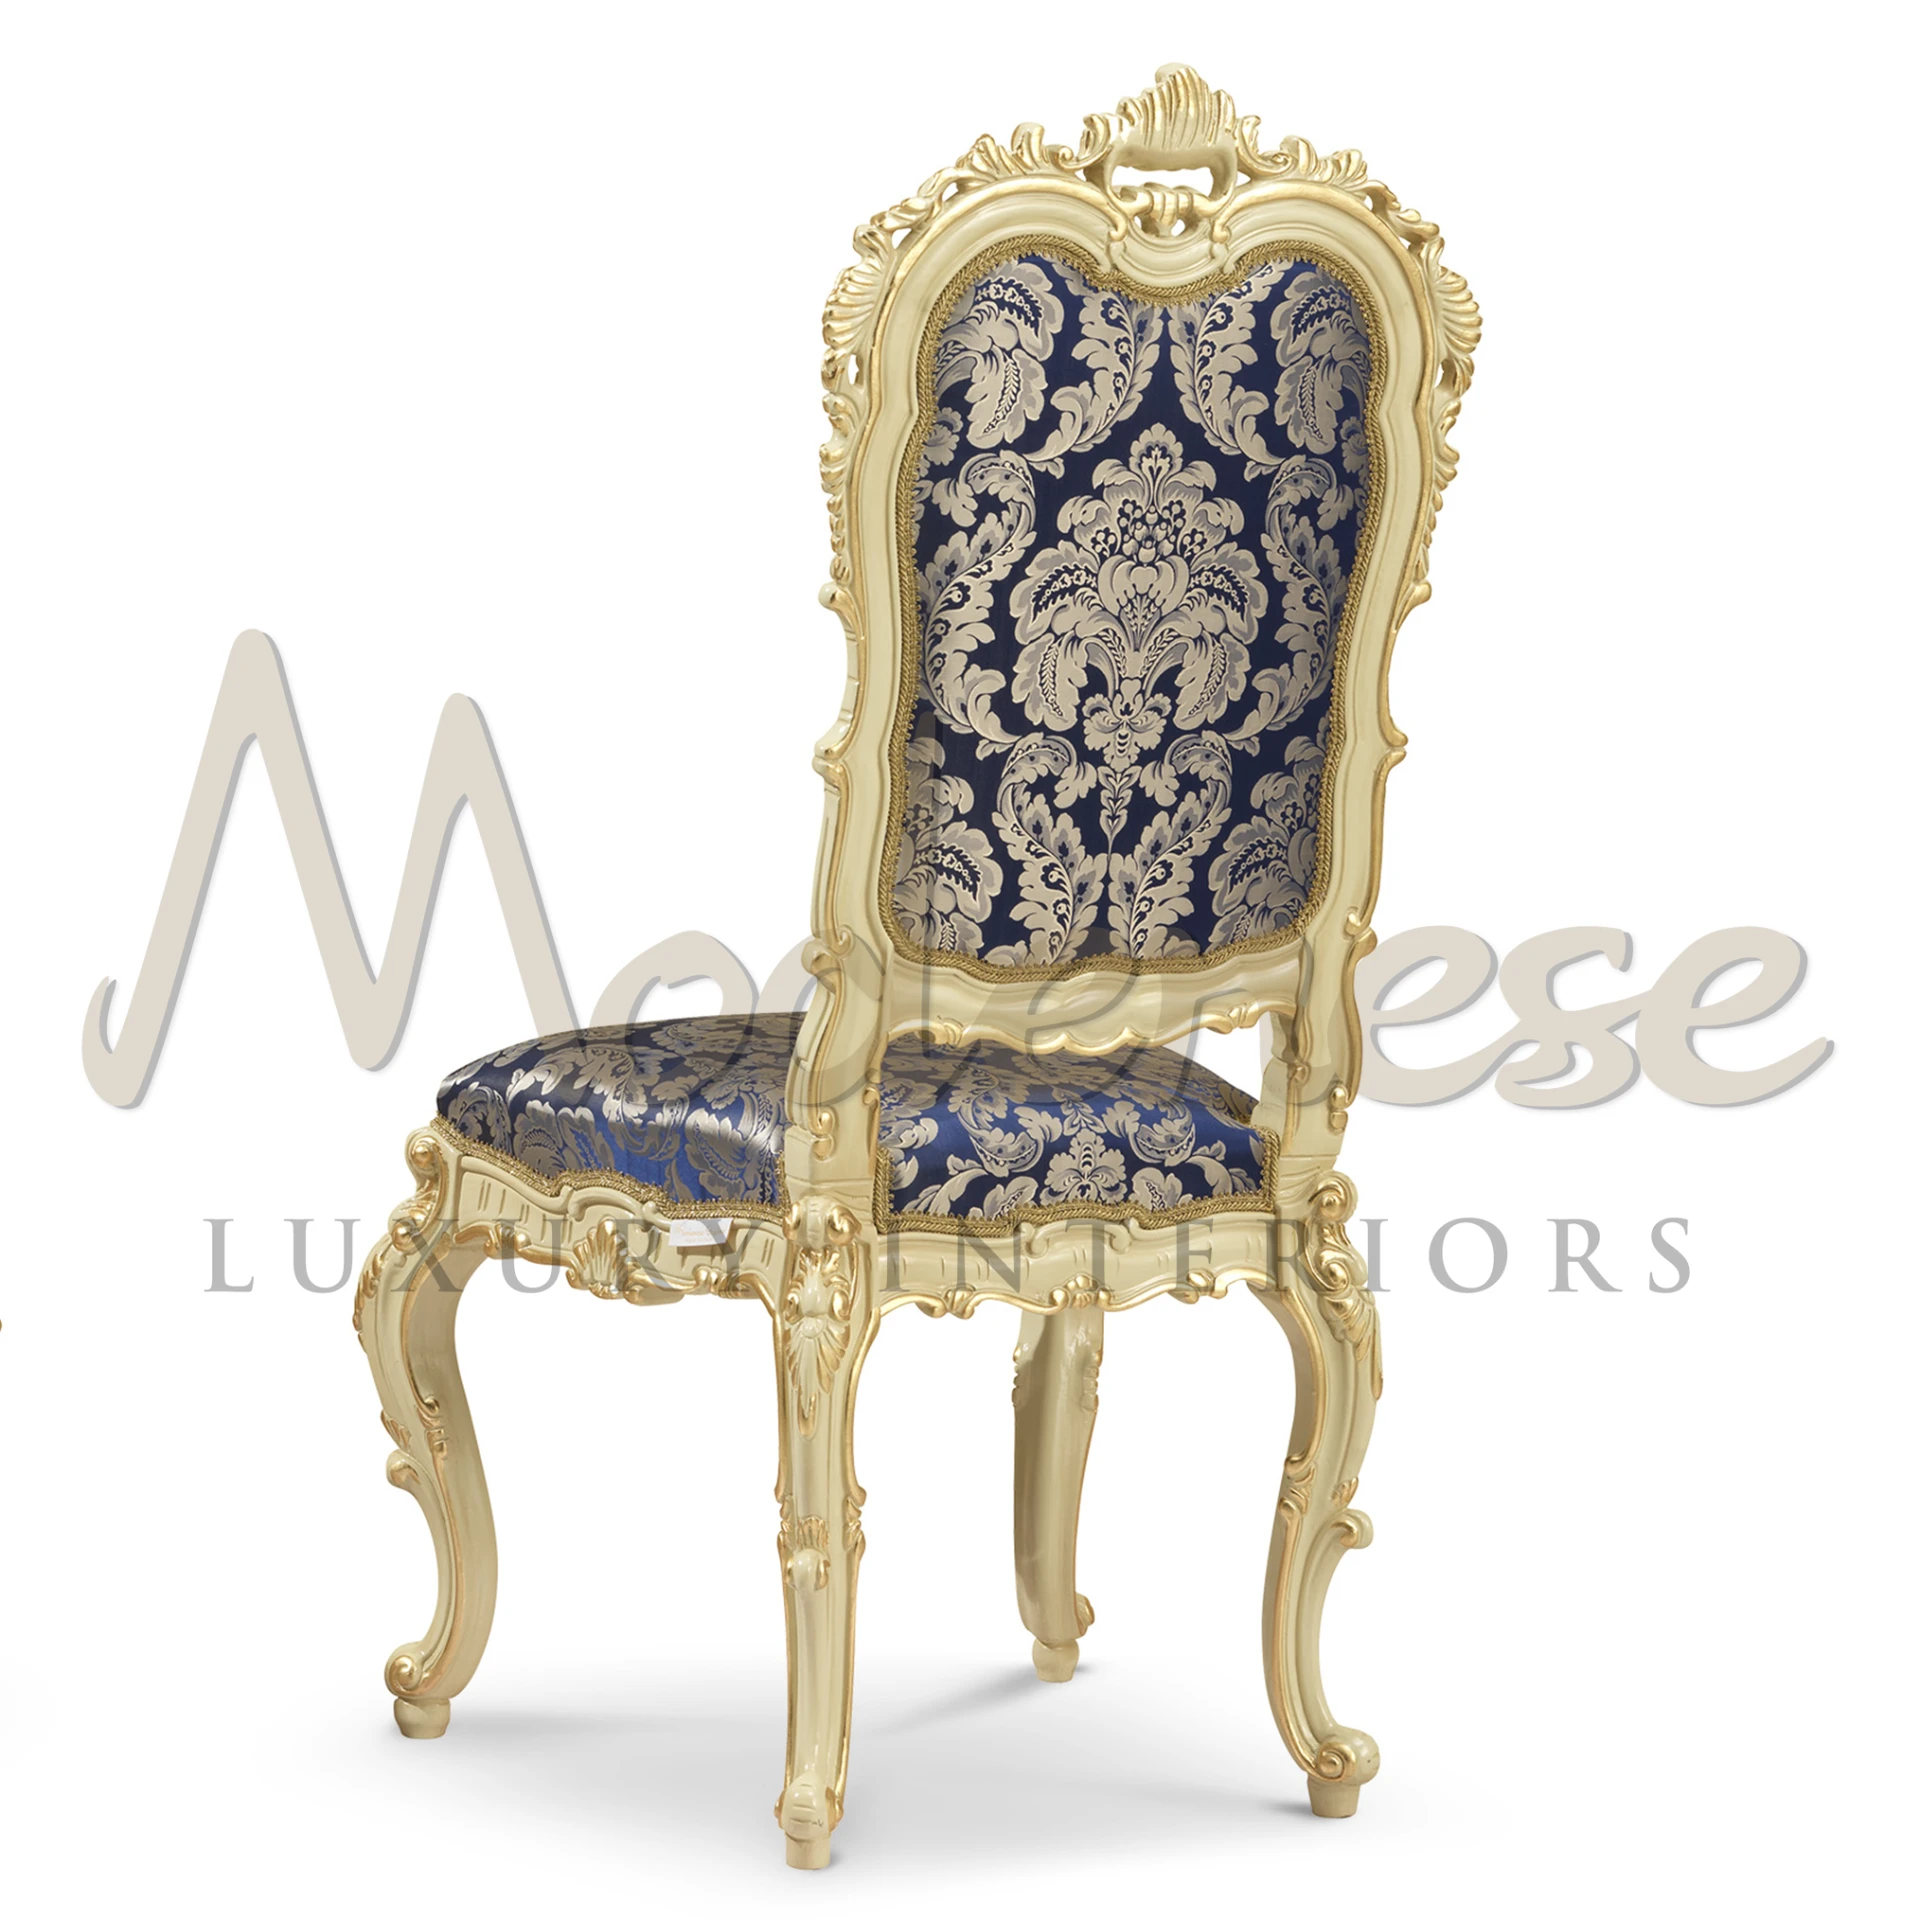 Luxurious Finely Hand Carved Chair with detailed artistry